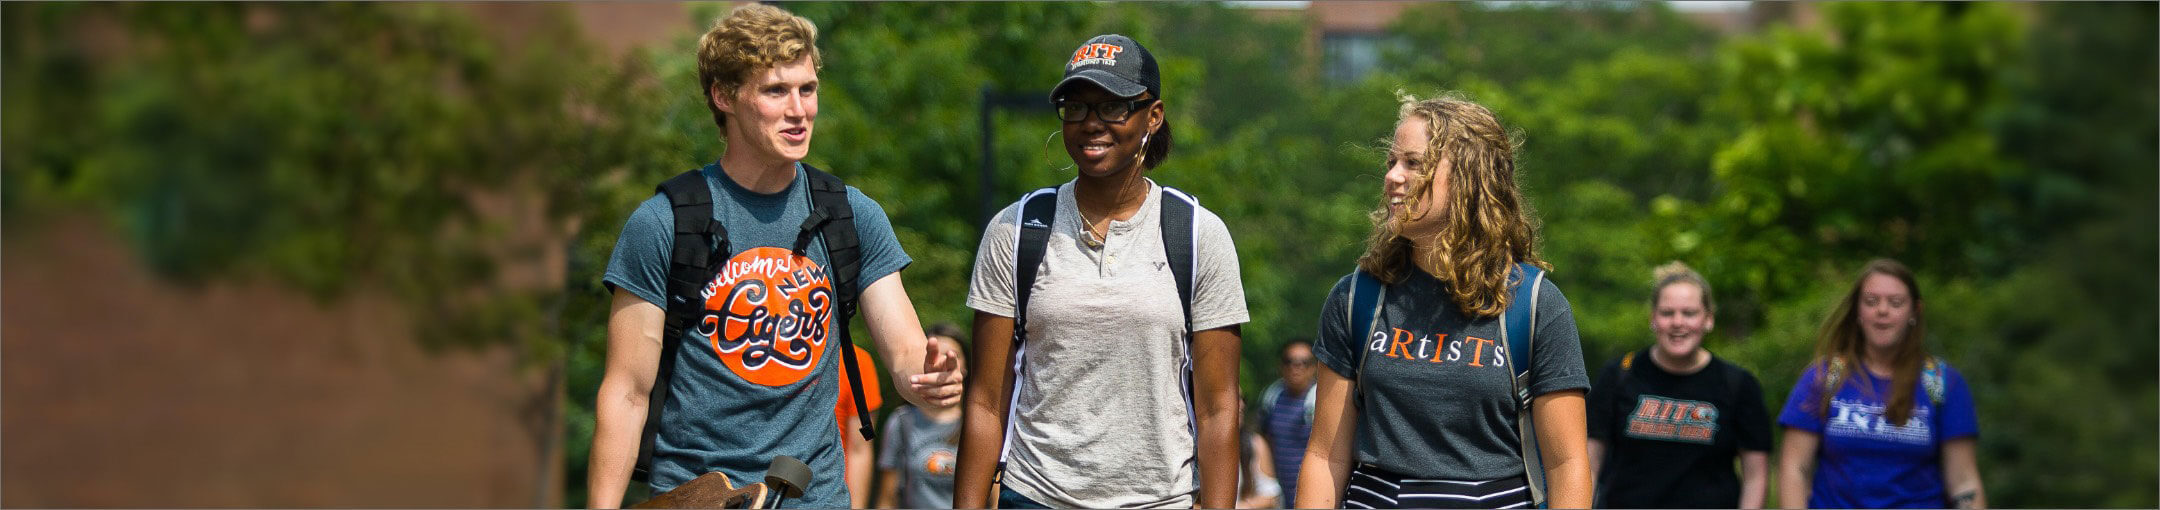 RIT students walking on the Quarter Mile walkway on campus.